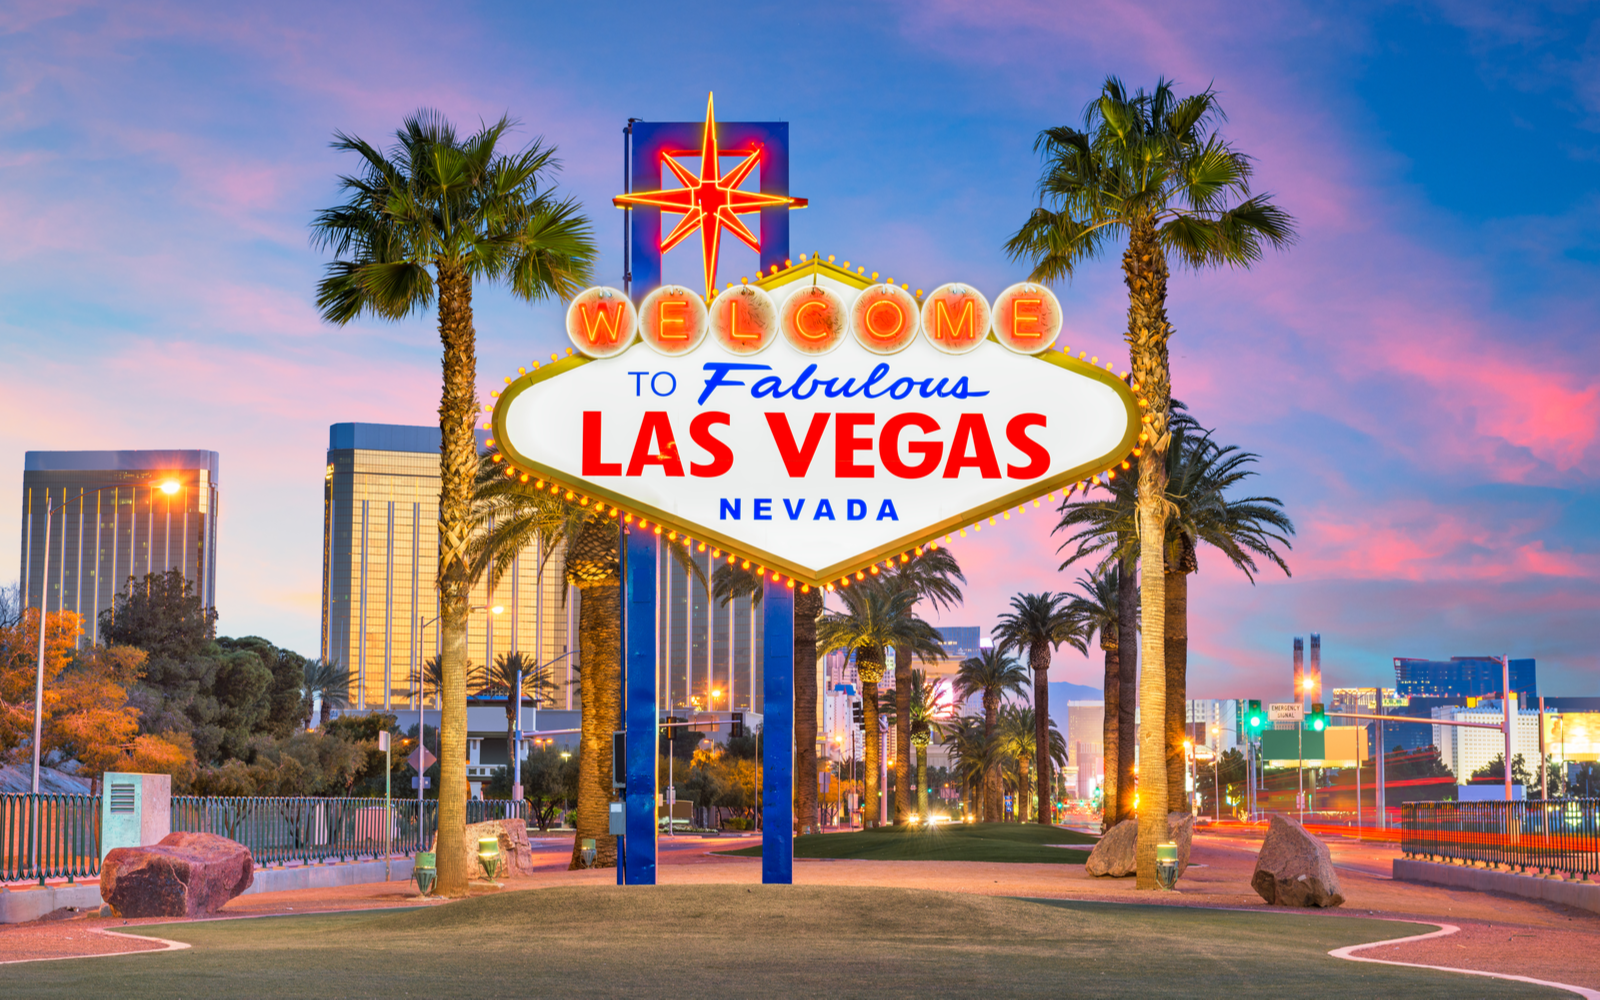 The Best Time to Visit Las Vegas in 2022